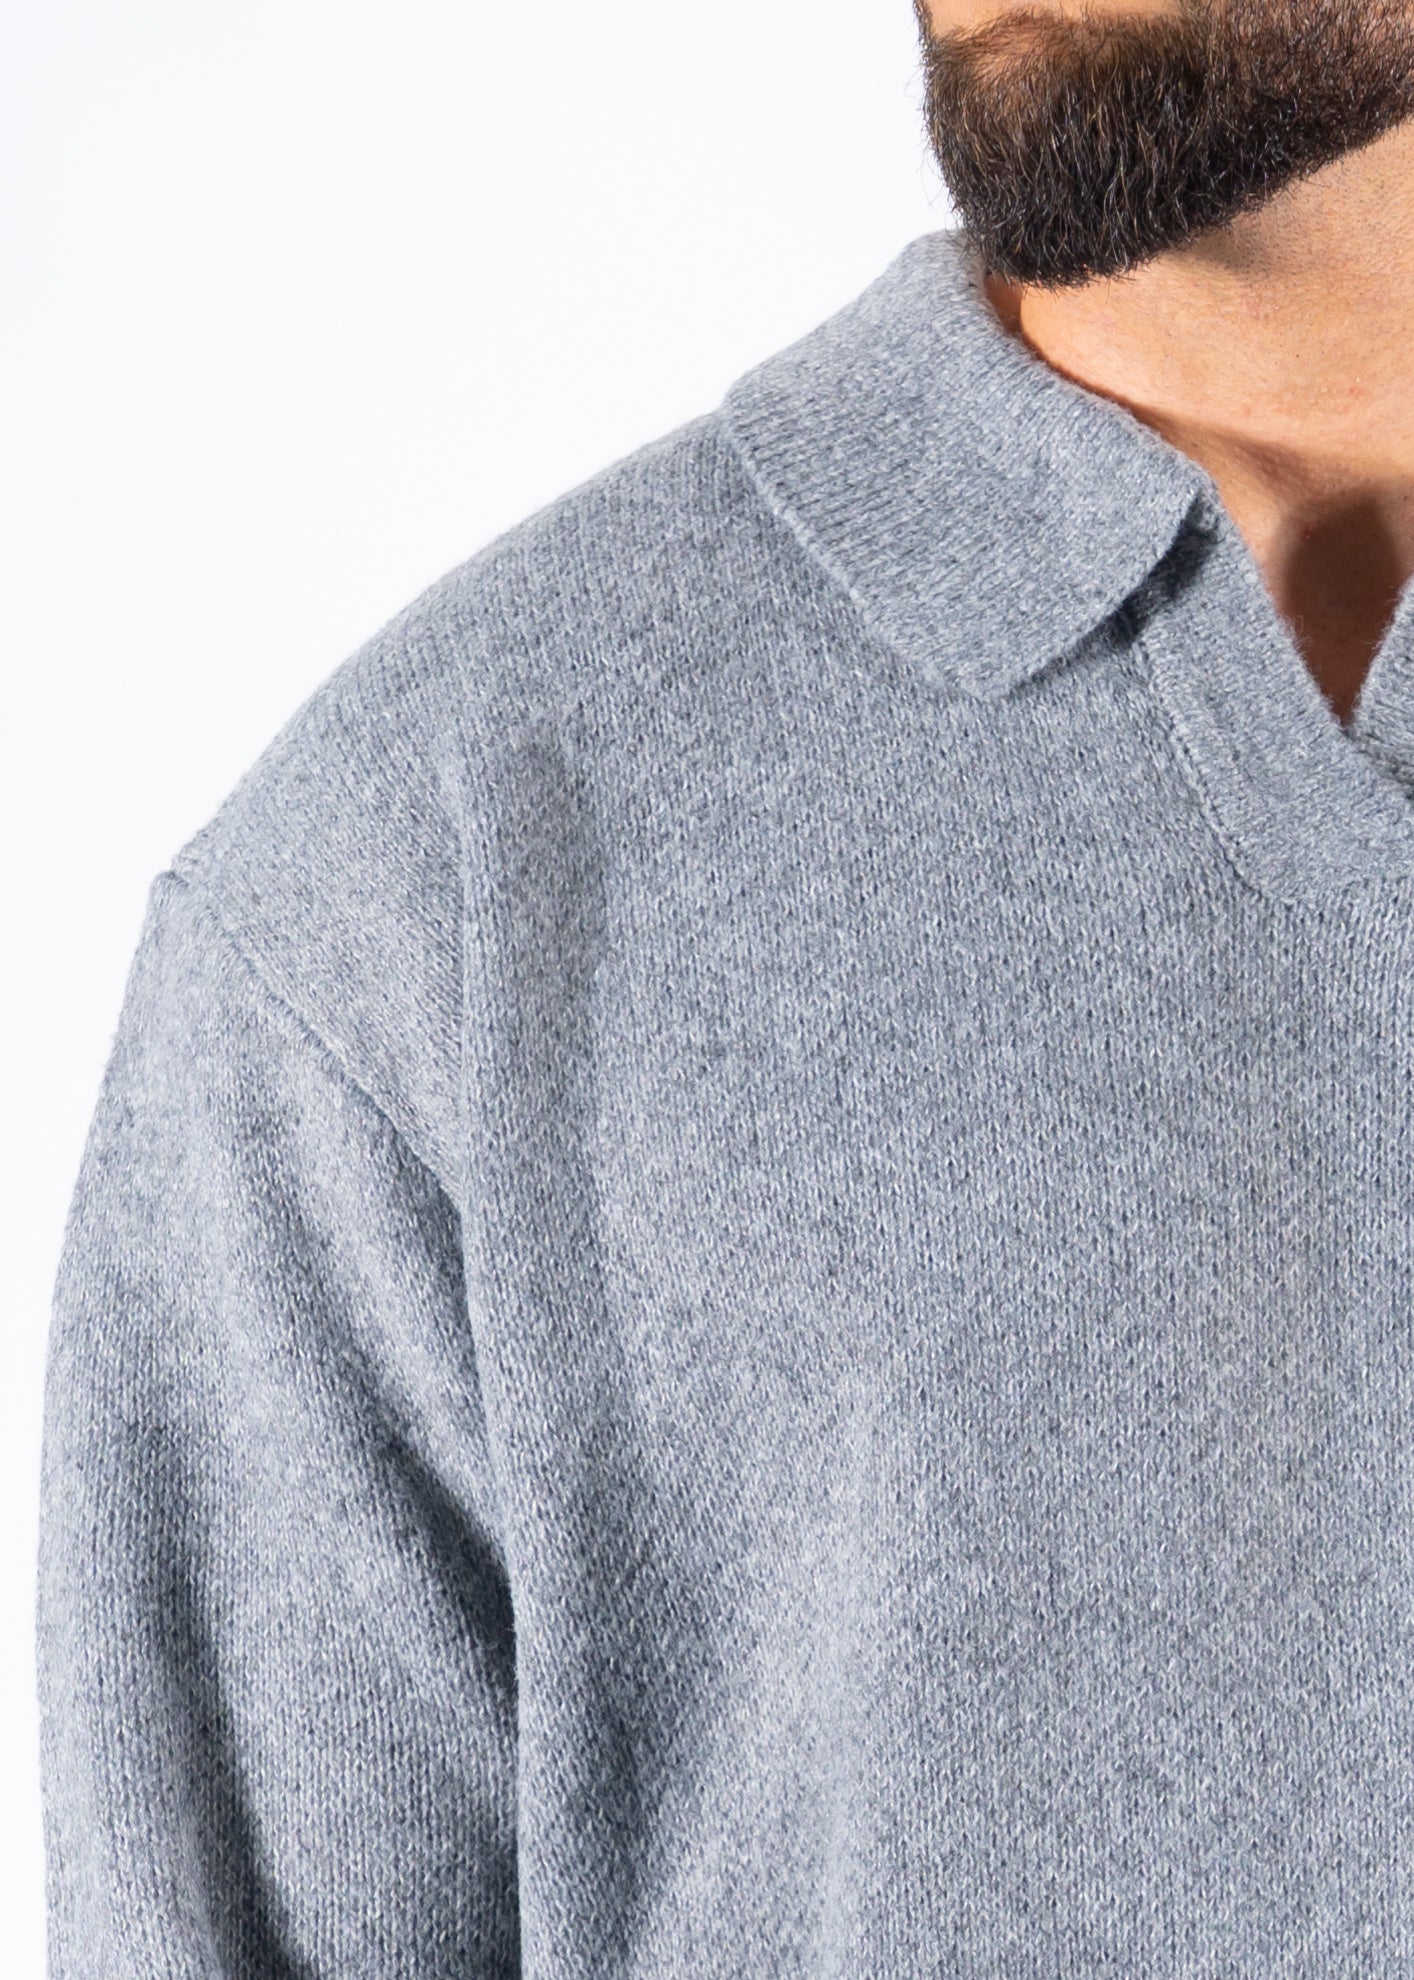 Sweater polo knitted grey oversized